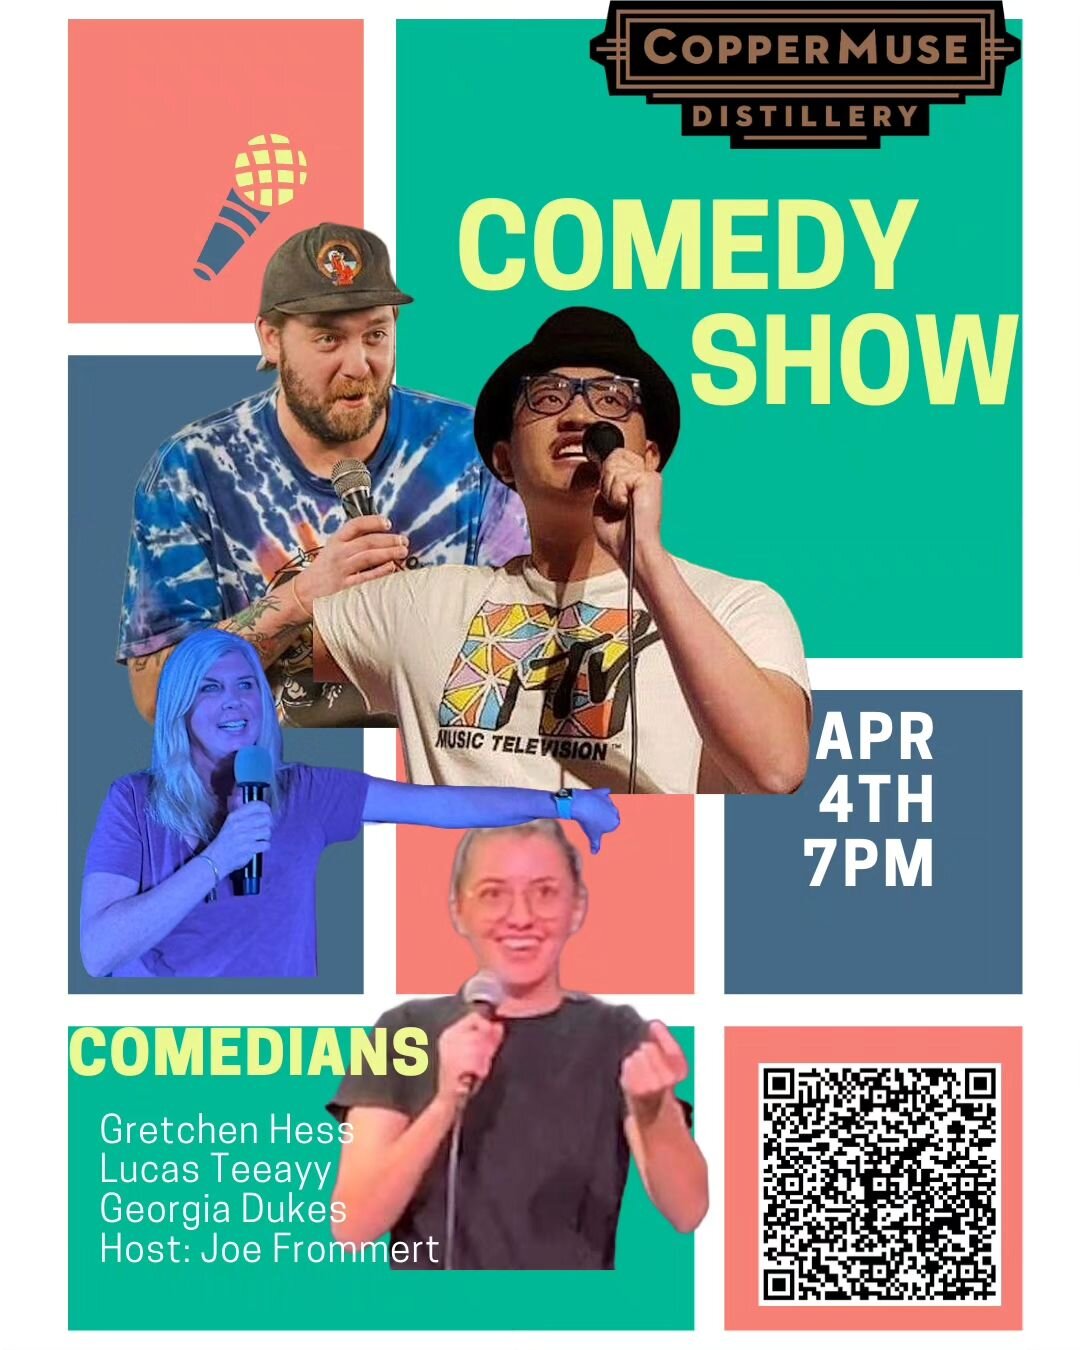 Comedy Nite at the Muse is this Thursday! 

🎟Be sure to snag a ticket before they're gone!🎟⤵️

https://www.eventbrite.com/e/old-town-comedy-at-copper-muse-distillery-tickets-863150726057?aff=oddtdtcreator